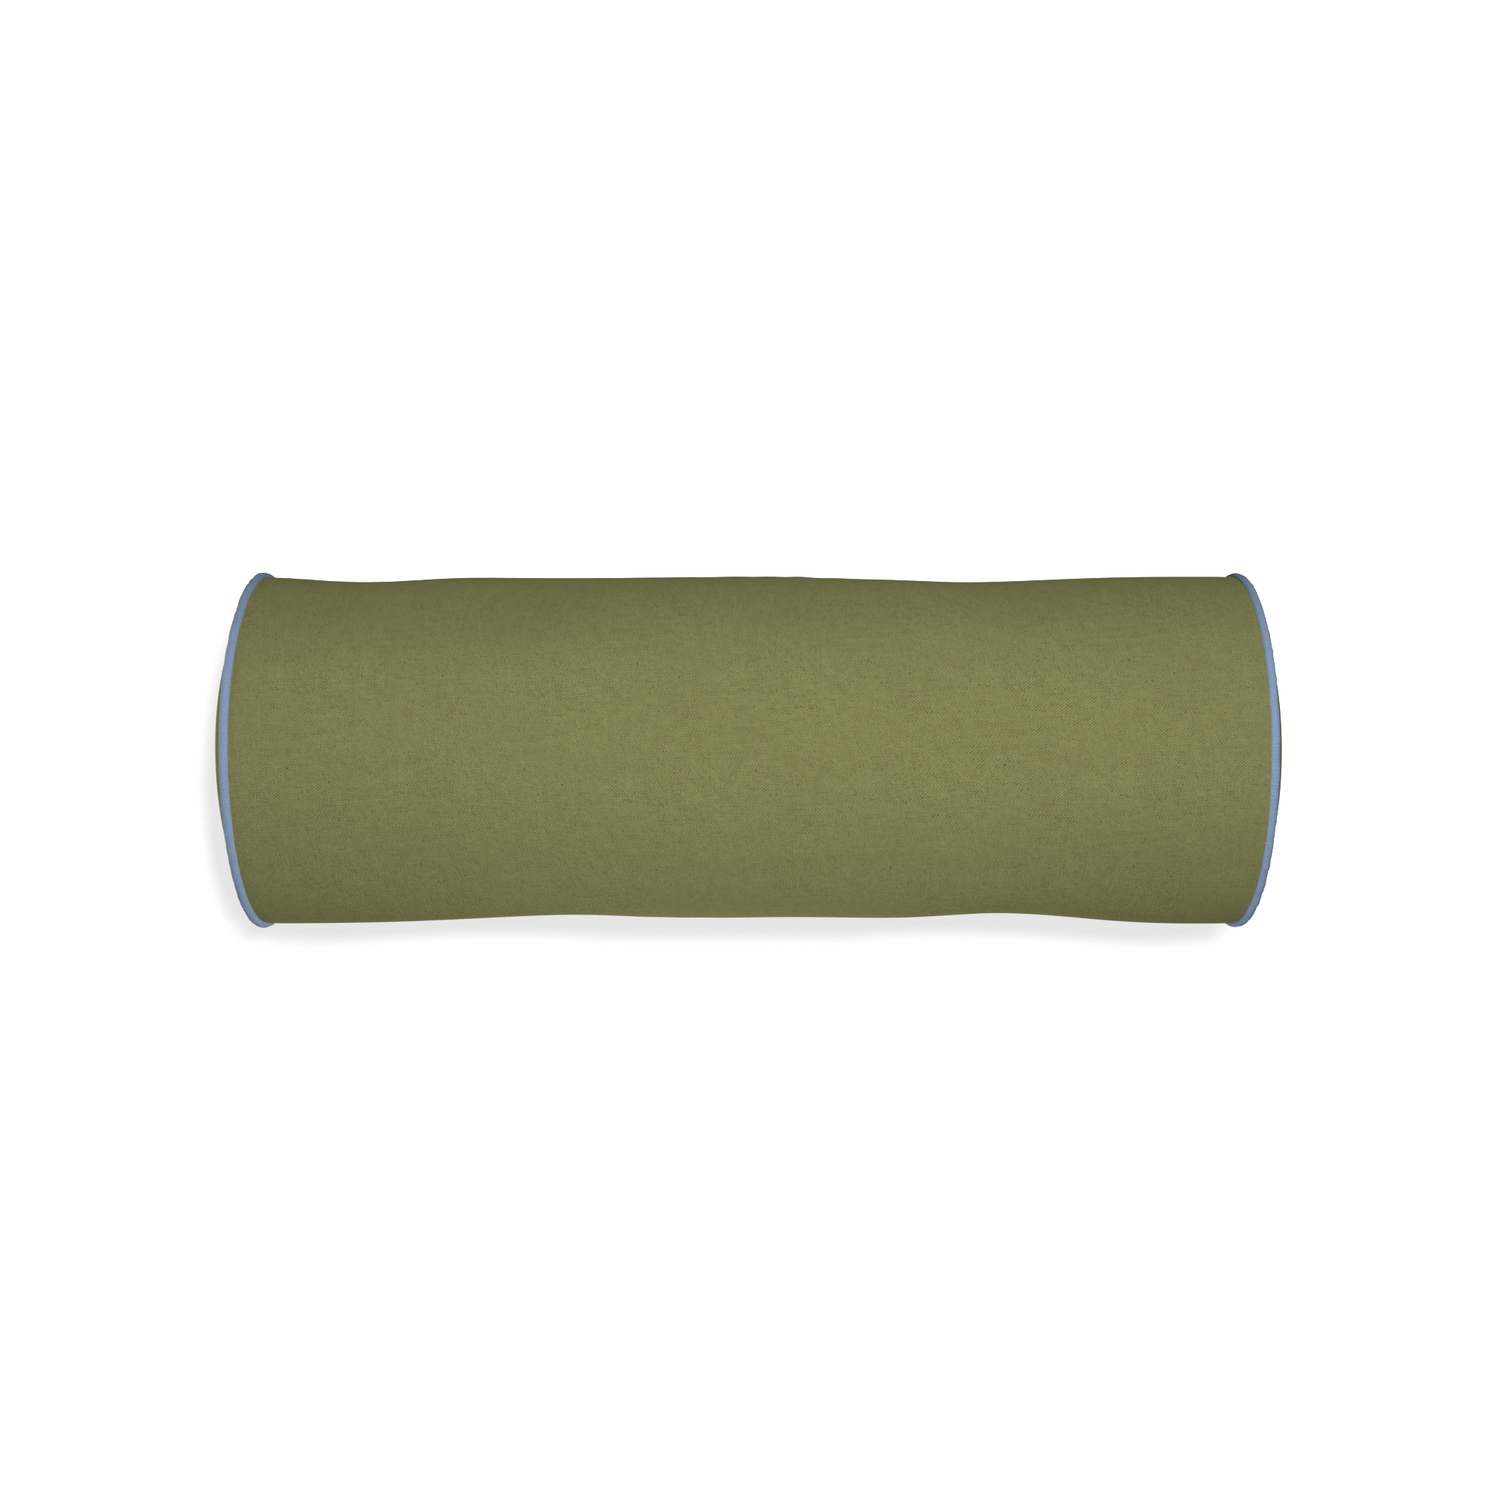 Bolster moss custom moss greenpillow with sky piping on white background